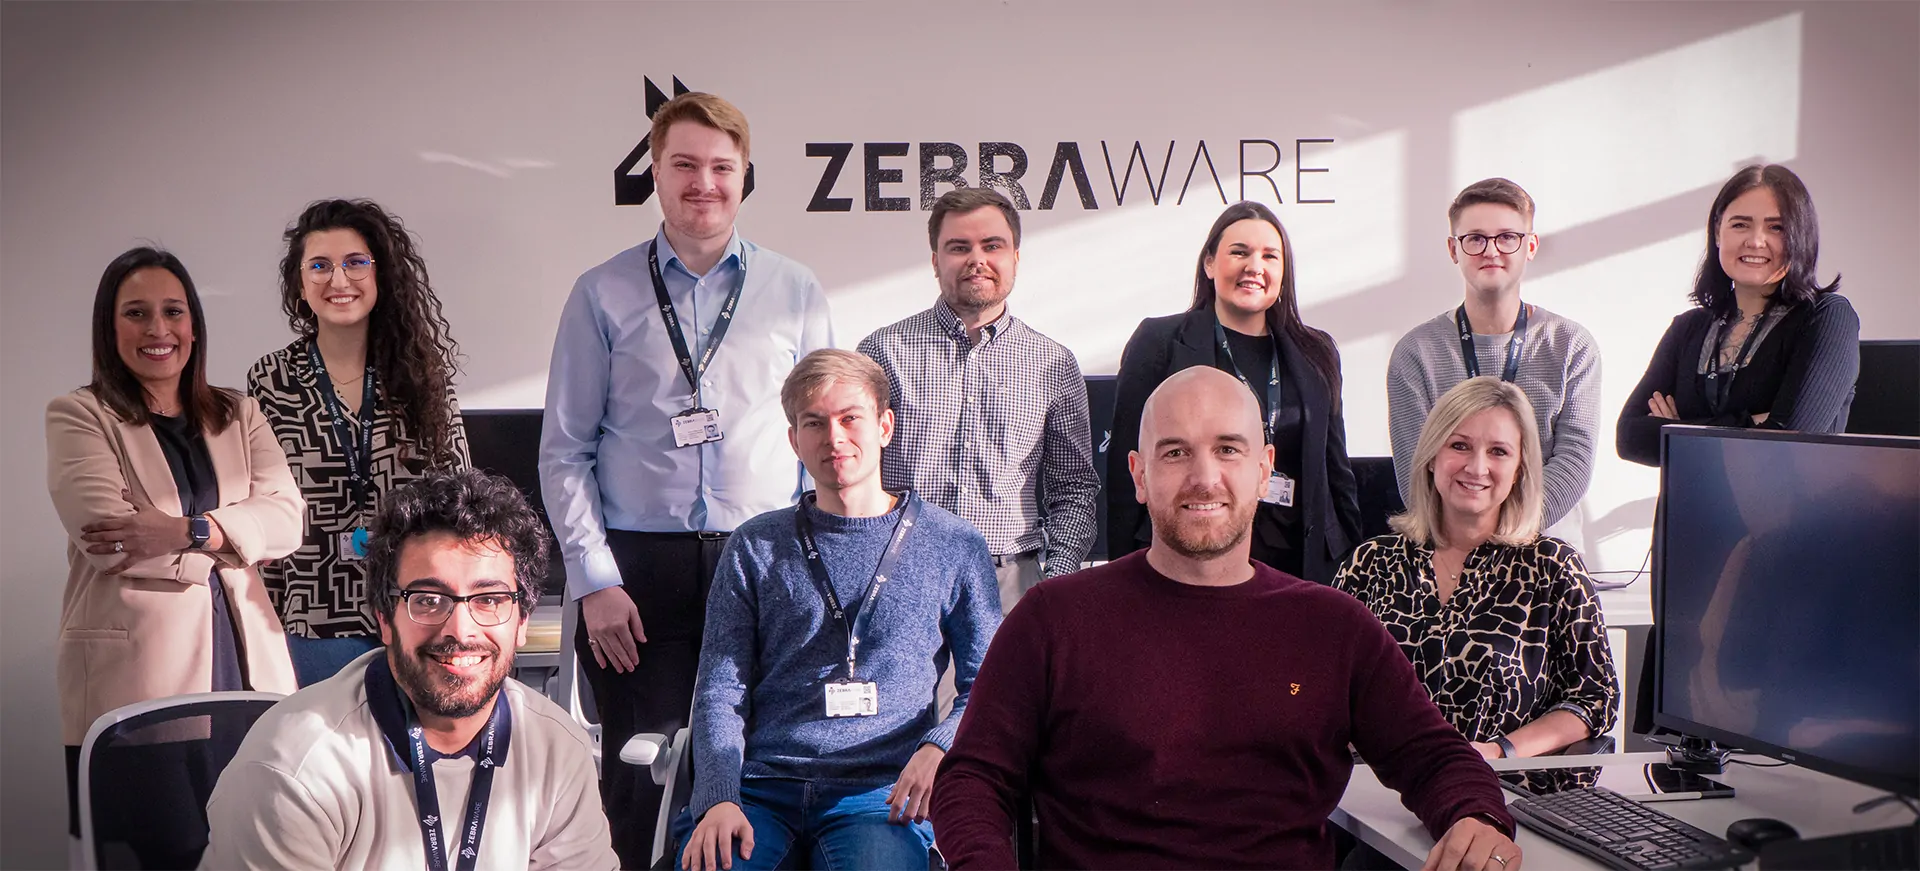 A group shot of the Zebraware team.